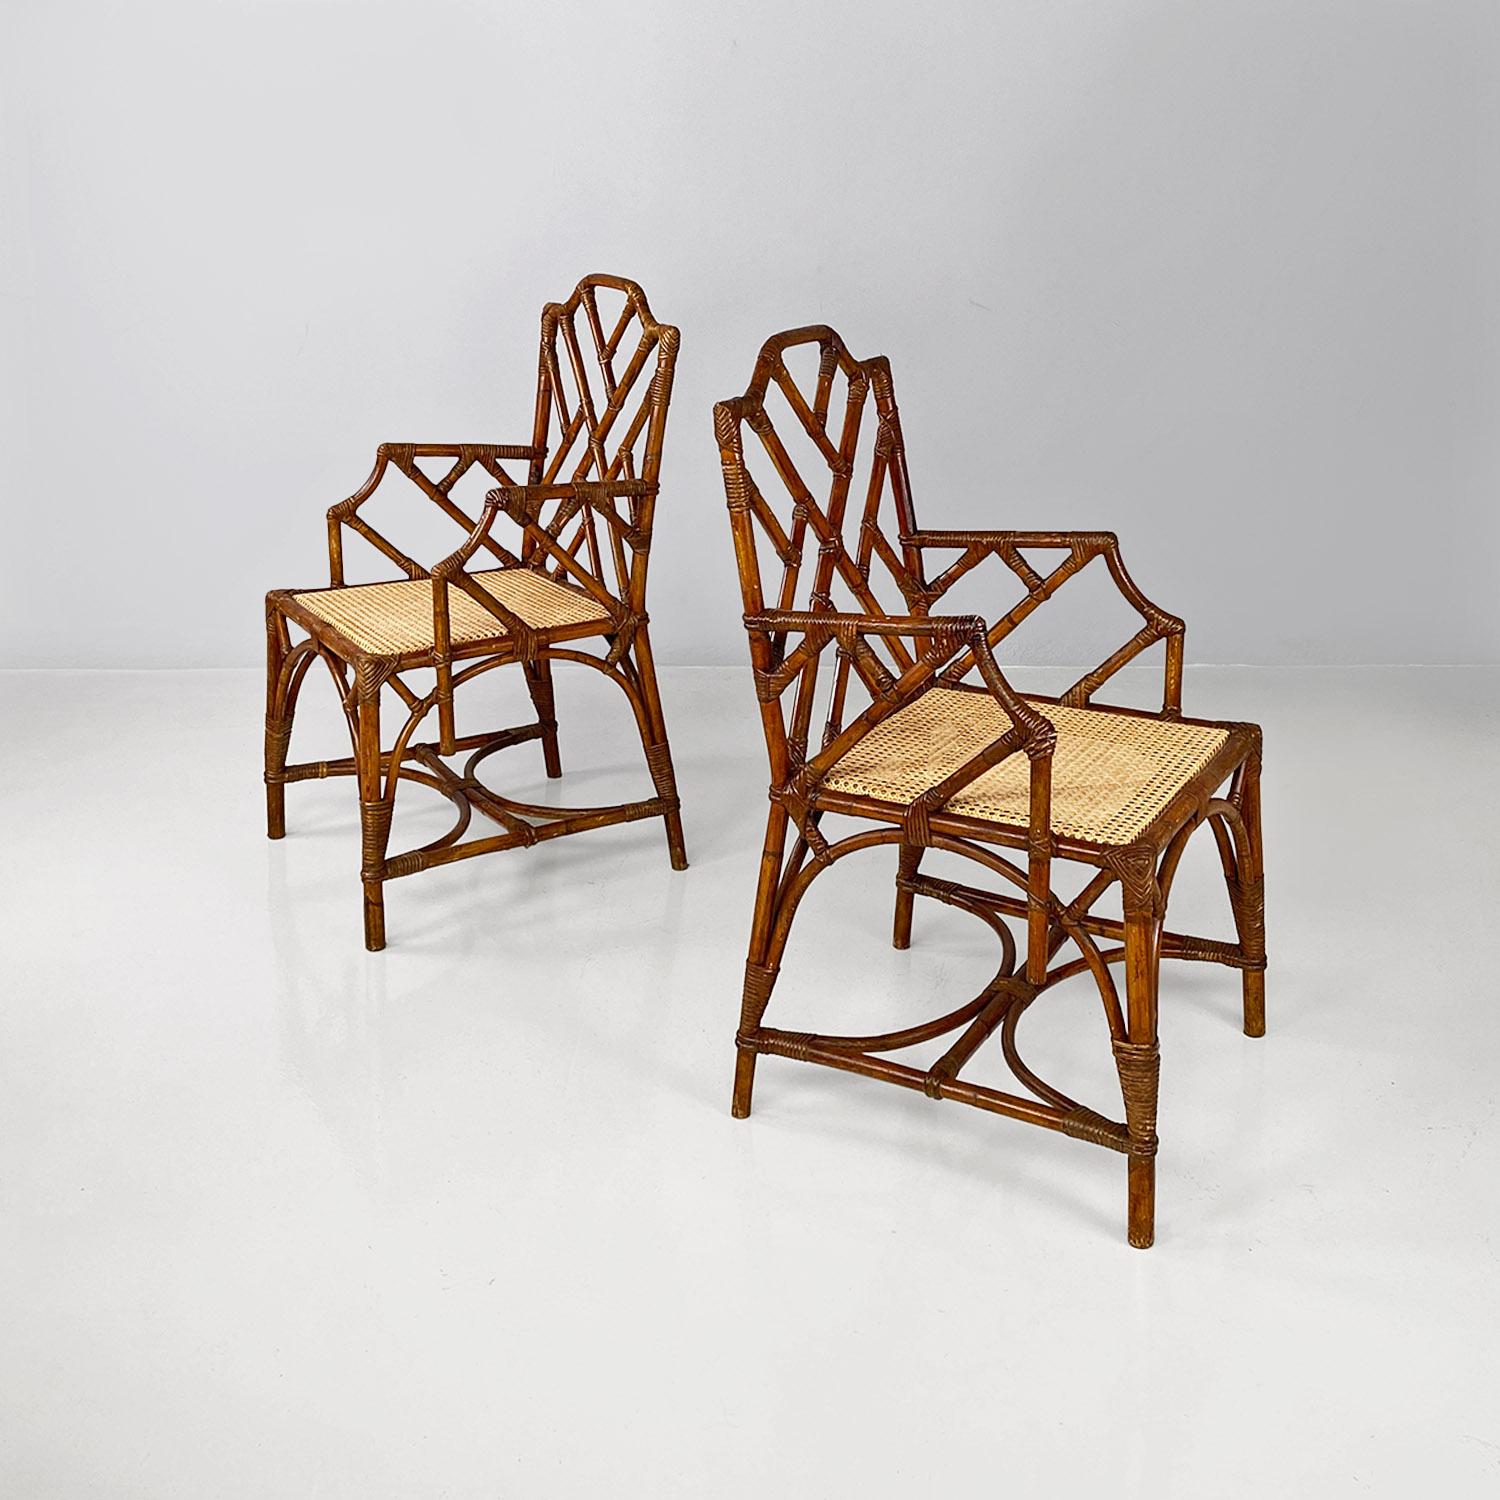 Italian mid-century modern rattan, bamboo and Vienna straw armchairs, 1960s.
Pair of rattan armchairs with Vienna straw seat, therefore both the legs and the backrest and armrests of the armchair are made up of strips of curved and woven